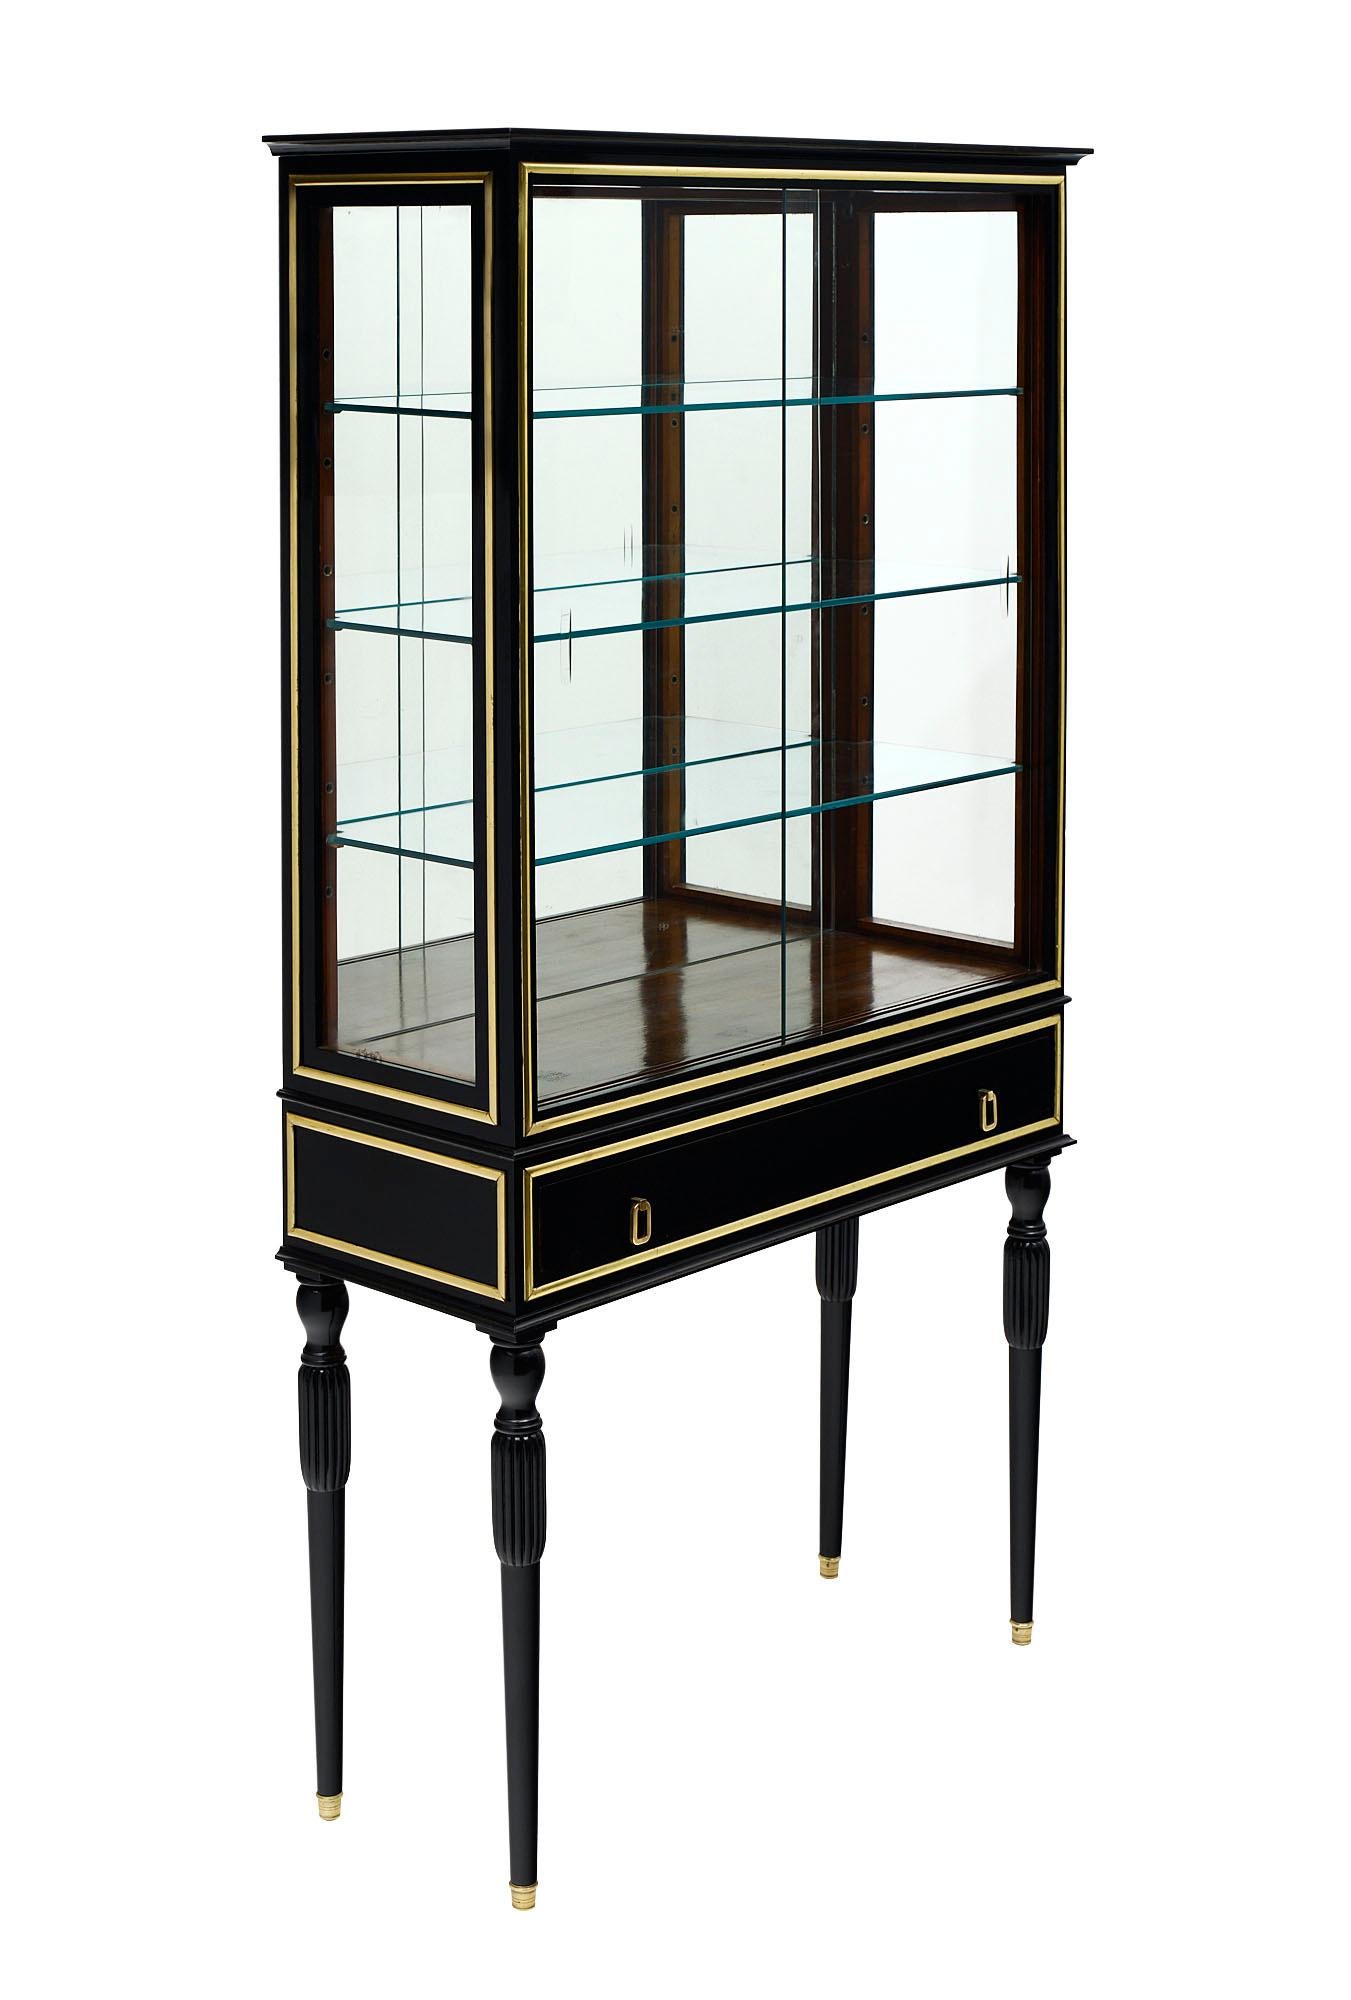 This French Louis XVI Vitrine is made of Mahogany ebonized and finished in a high luster Museum quality French polish. The cabinet is trimmed in gilt brass and features a dovetailed drawer; a back mirror; three glass shelves and clear glass sides.